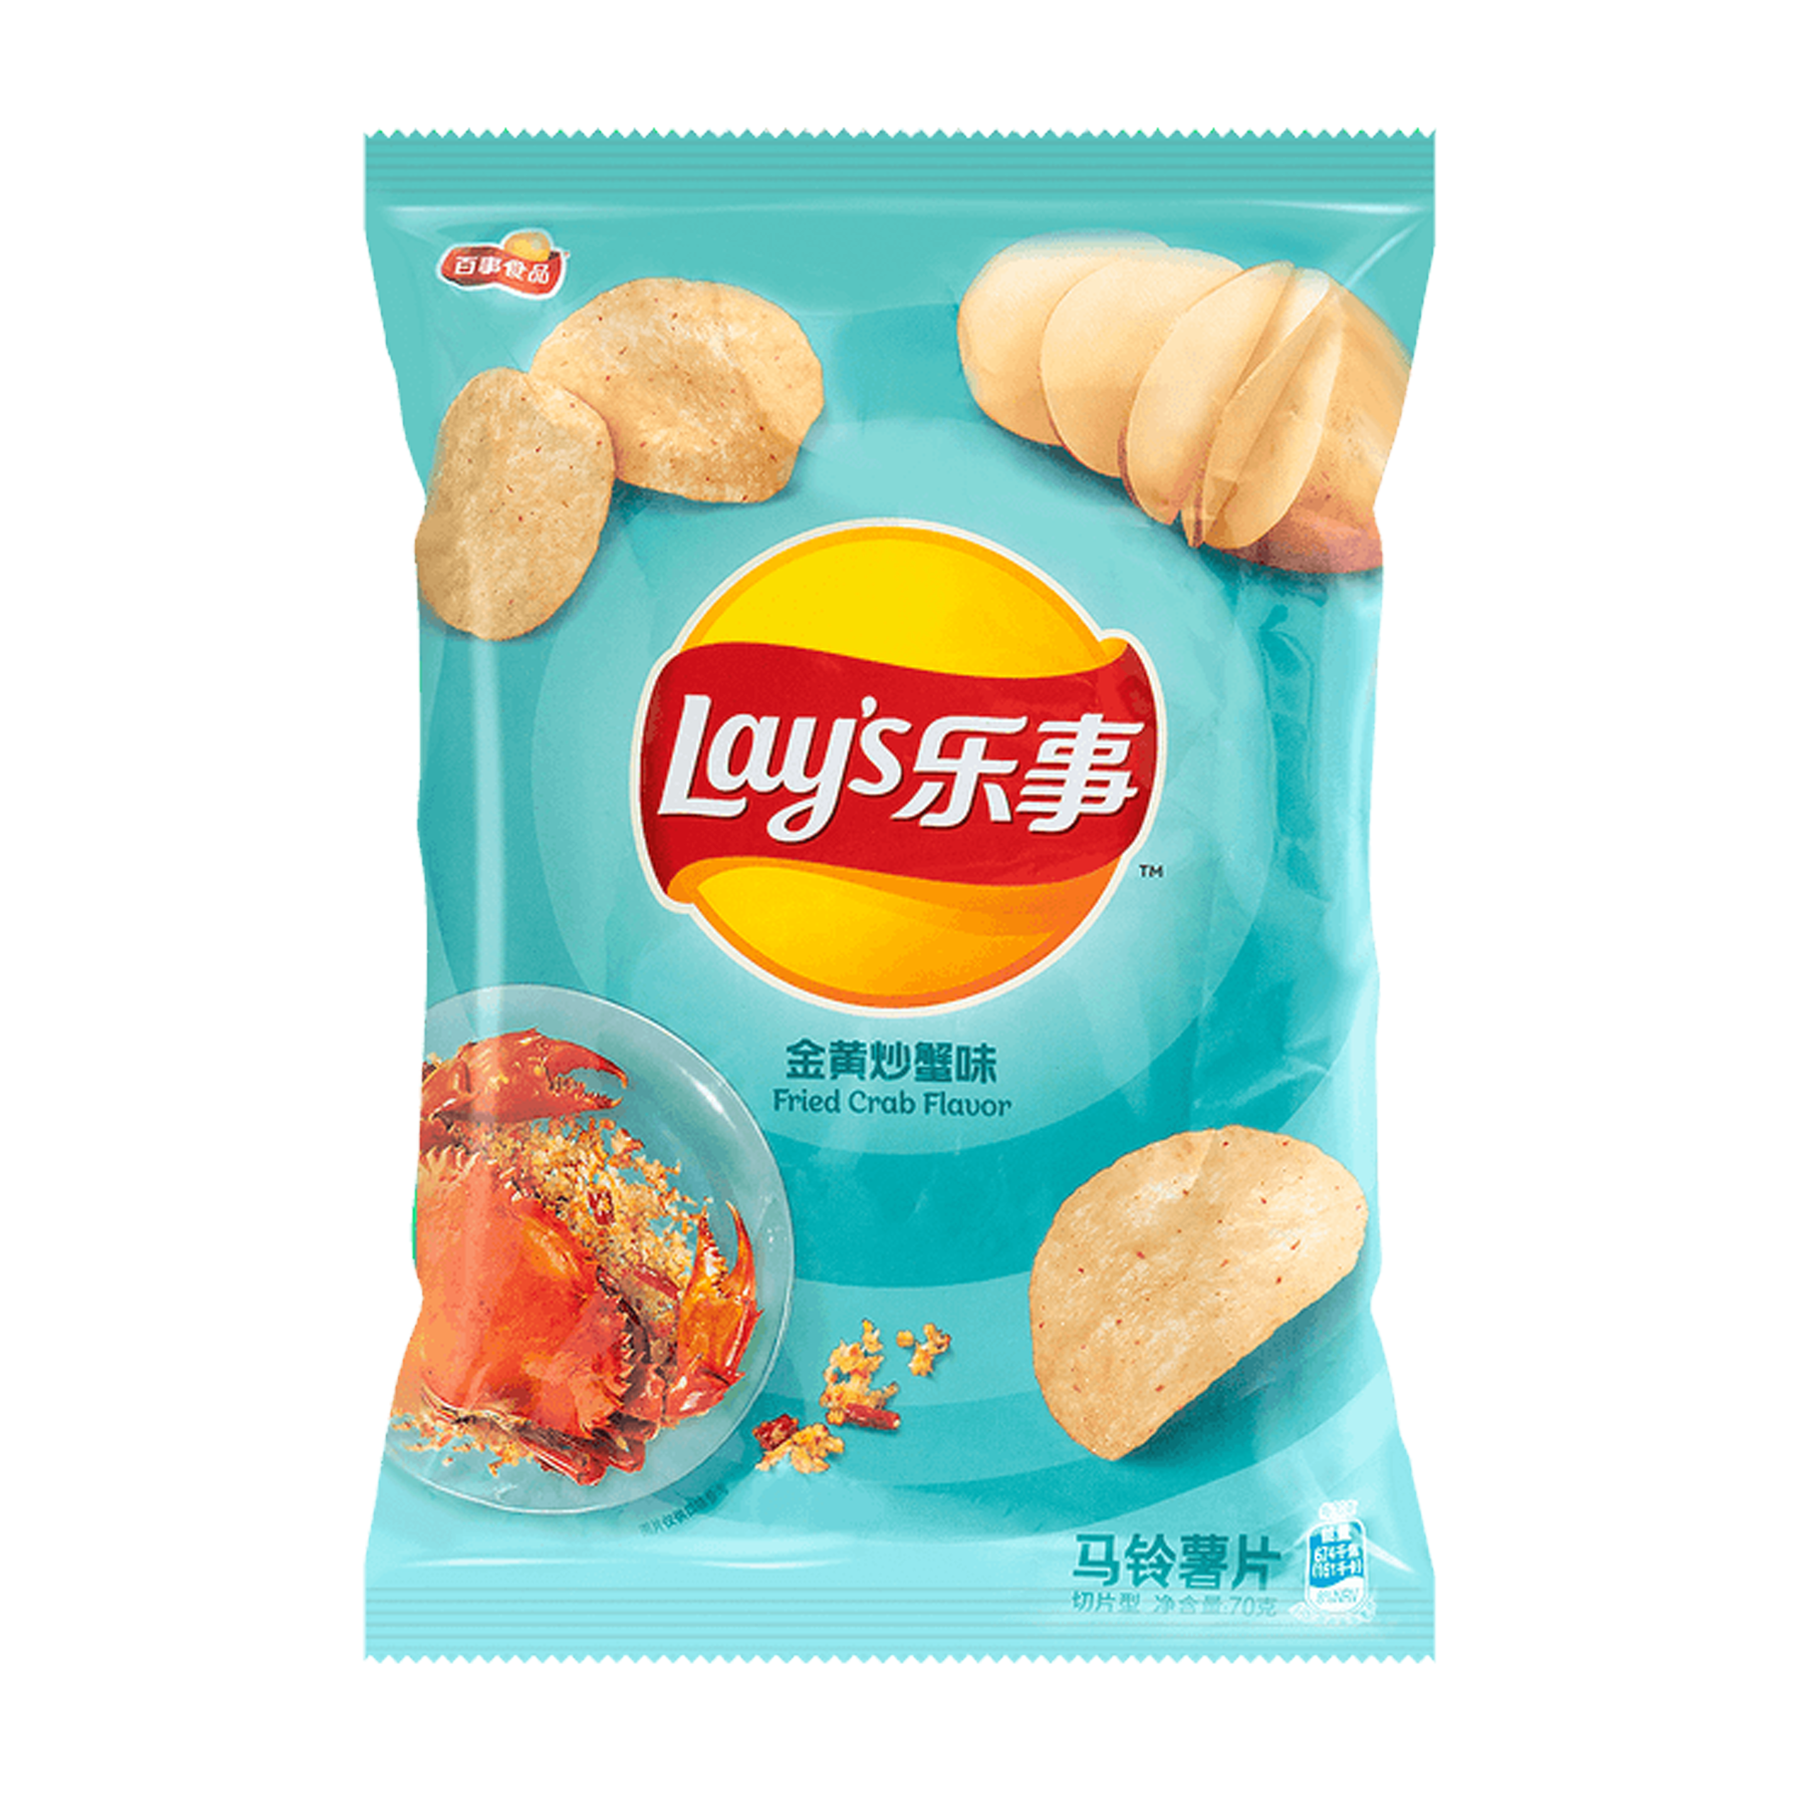 Lays Fried Crab